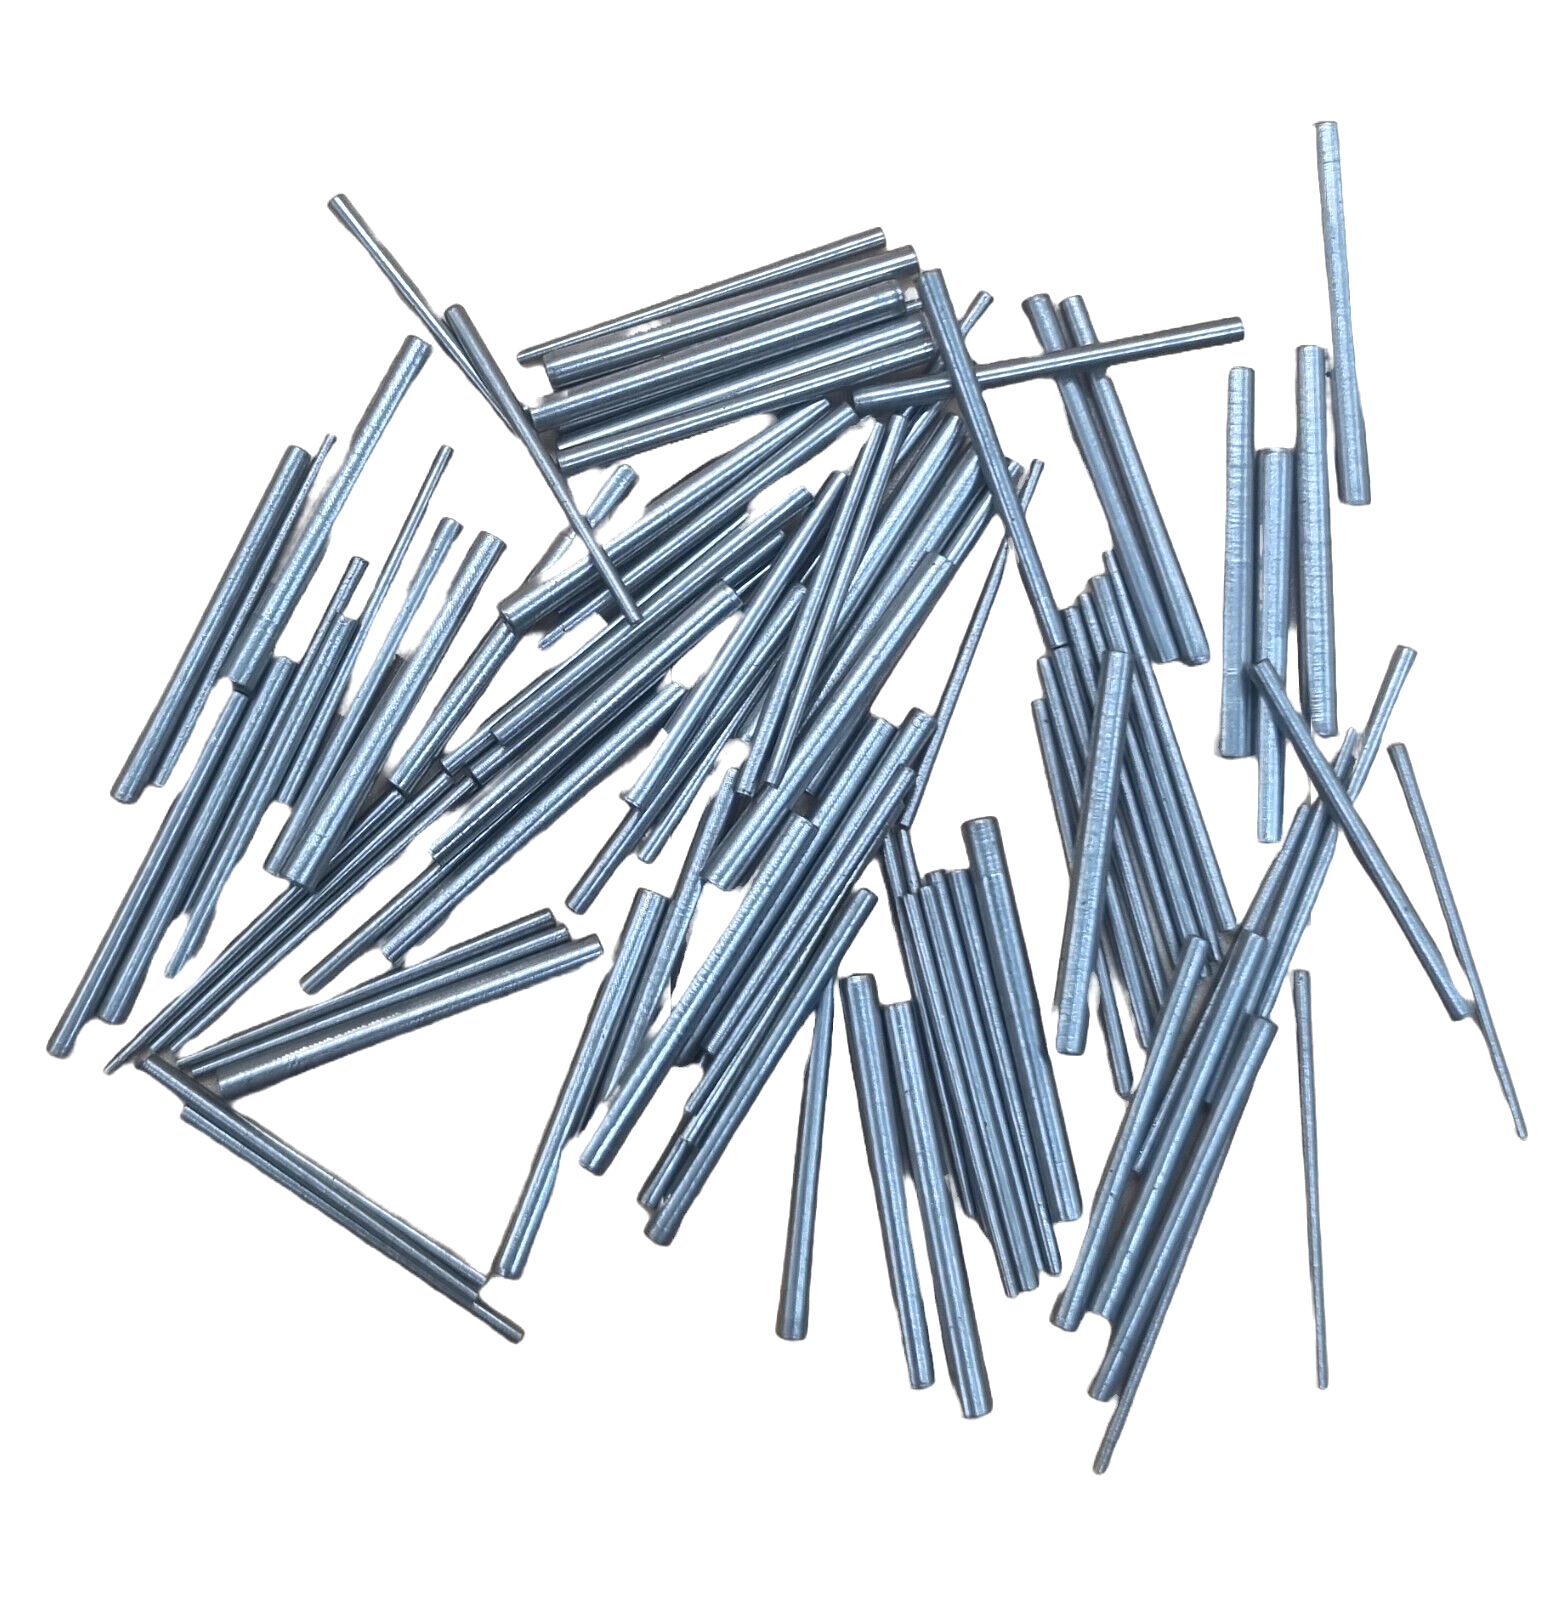 100 x Steel Clock tapered pins - Assorted mixed sizes - pin taper